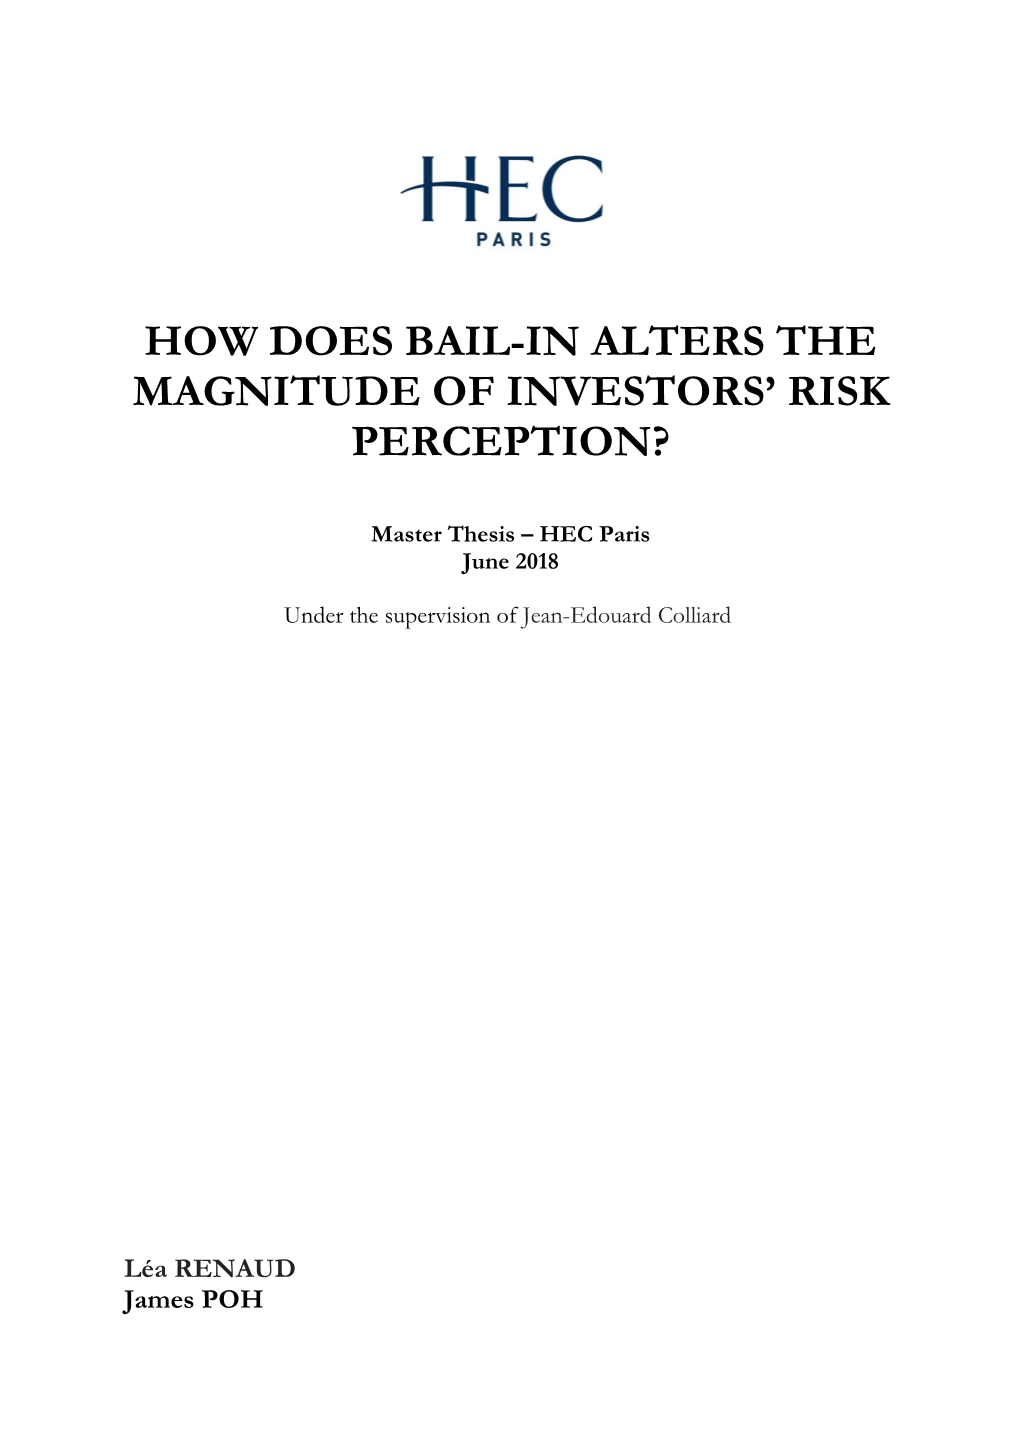 How Does Bail-In Alters the Magnitude of Investors’ Risk Perception?